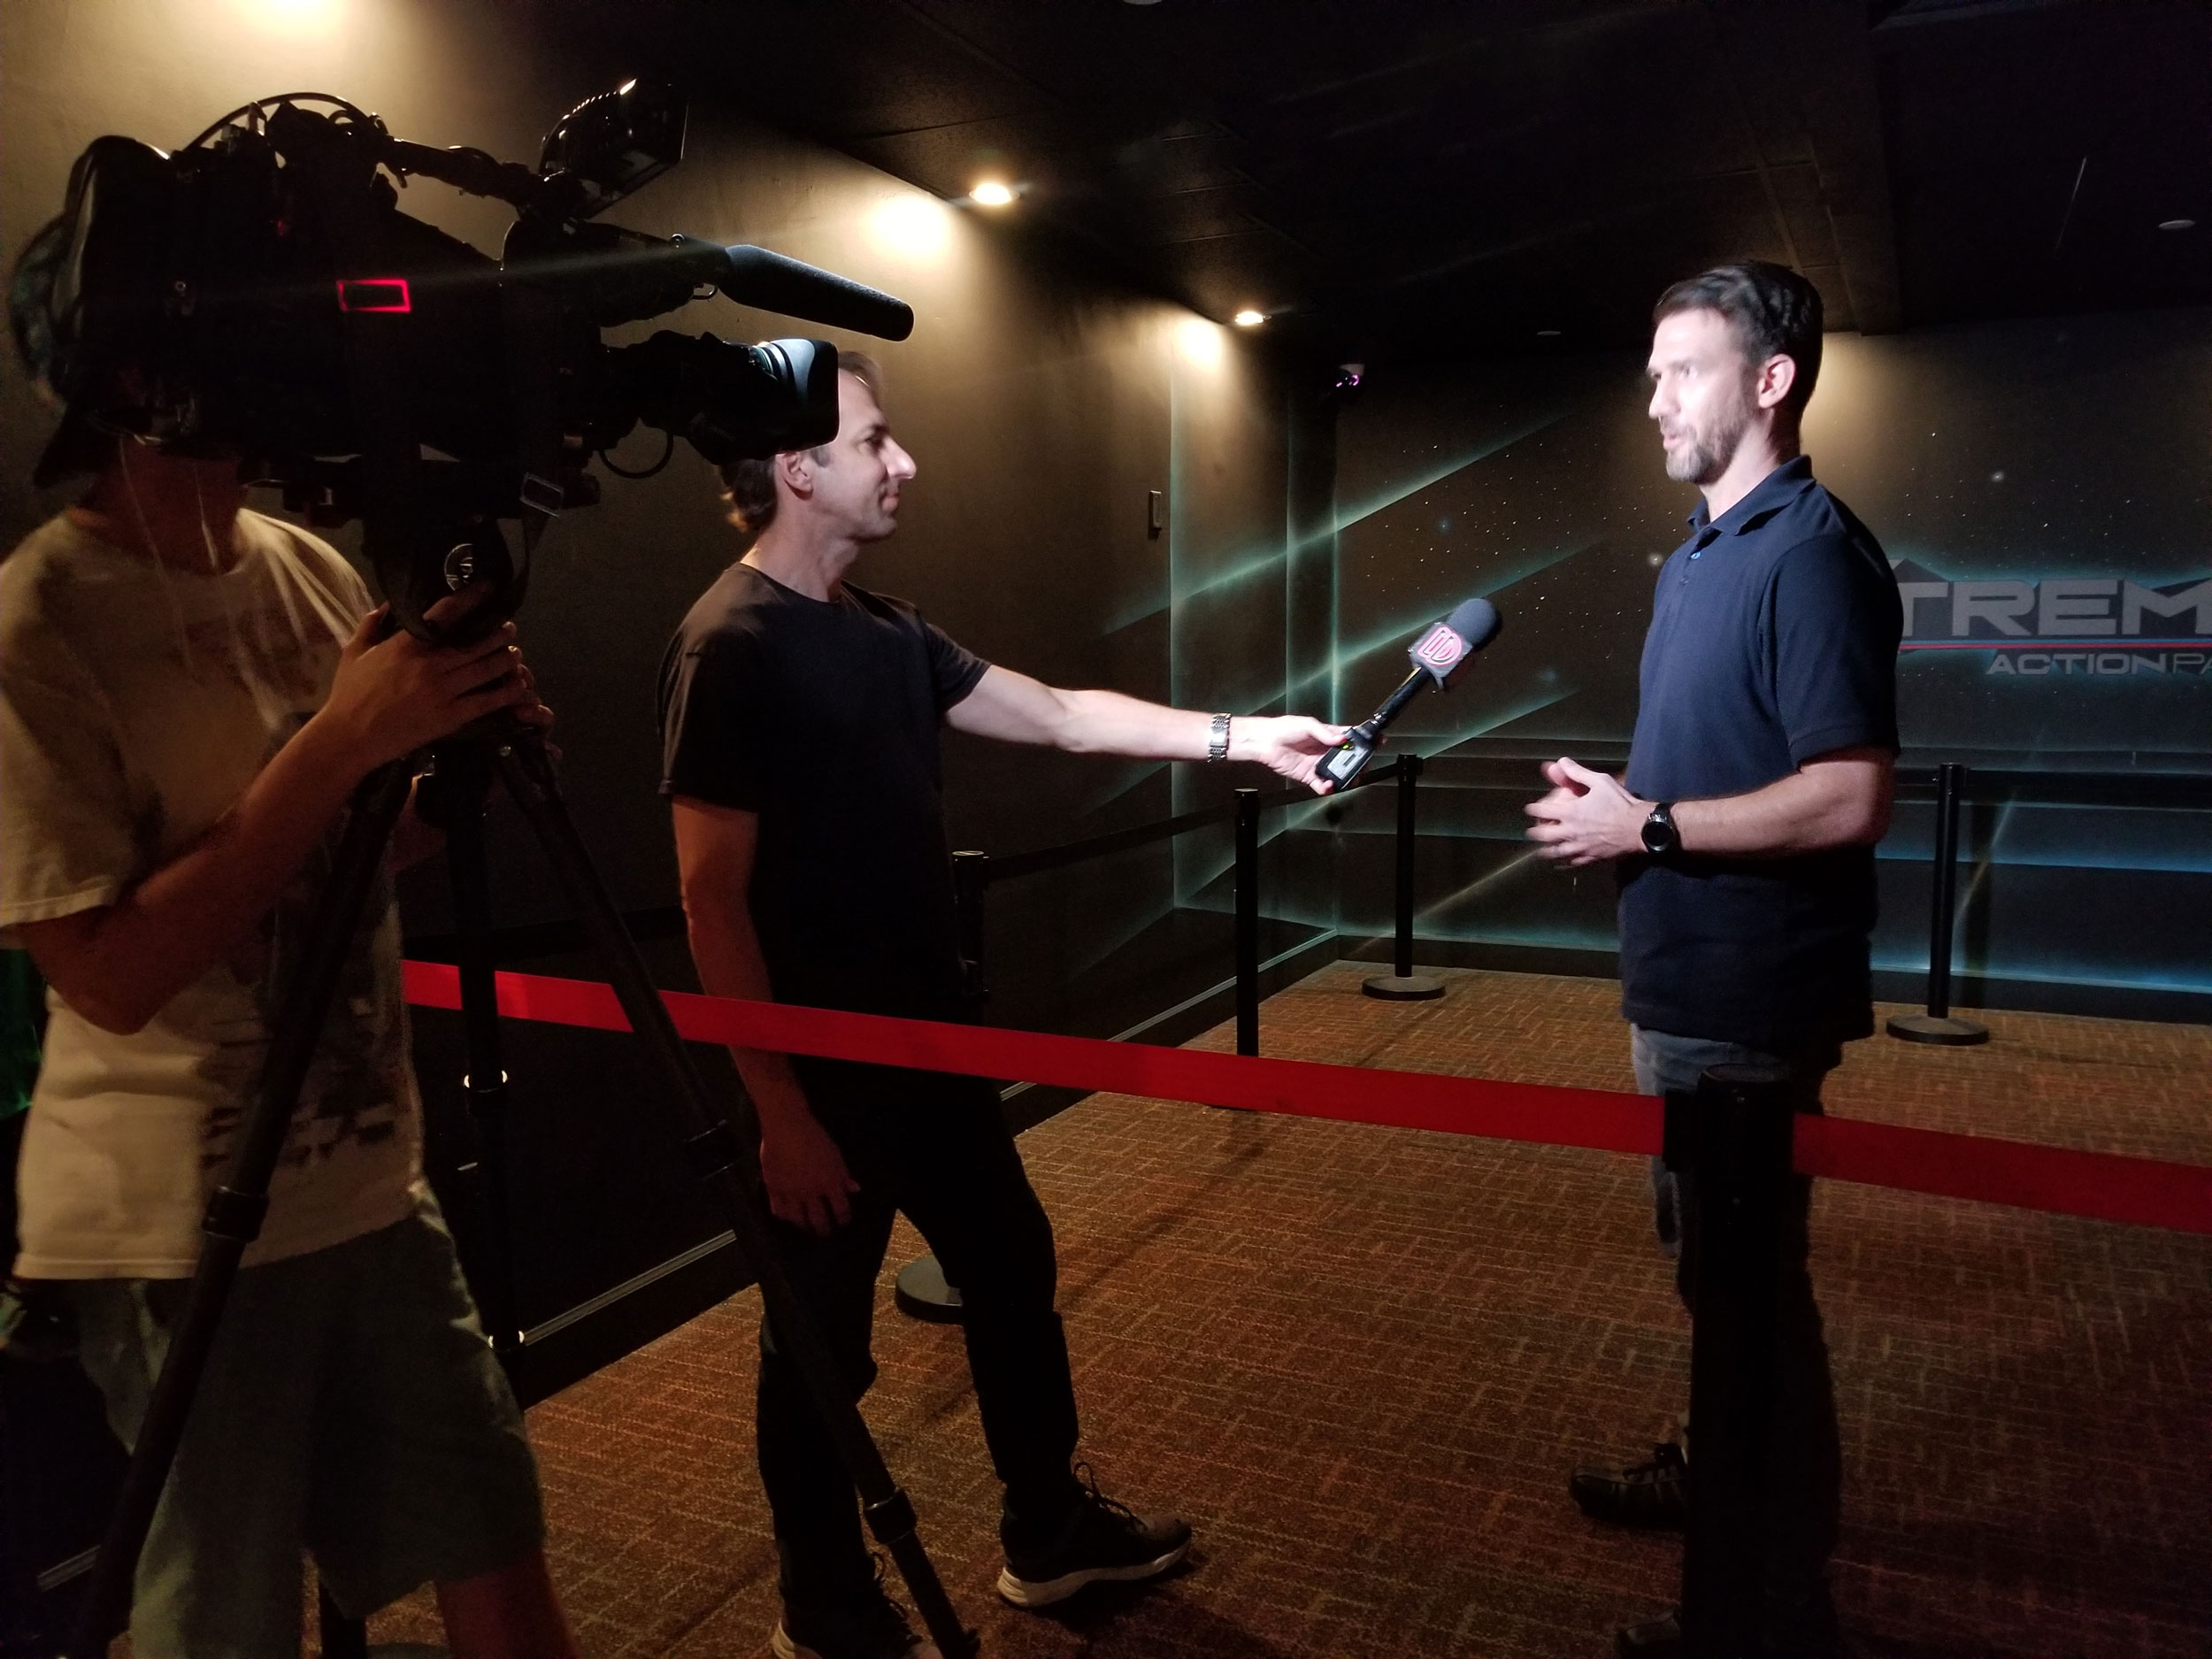 VR Escape Rooms featured on WSVN 7 Deco Drive | March 12, 2019